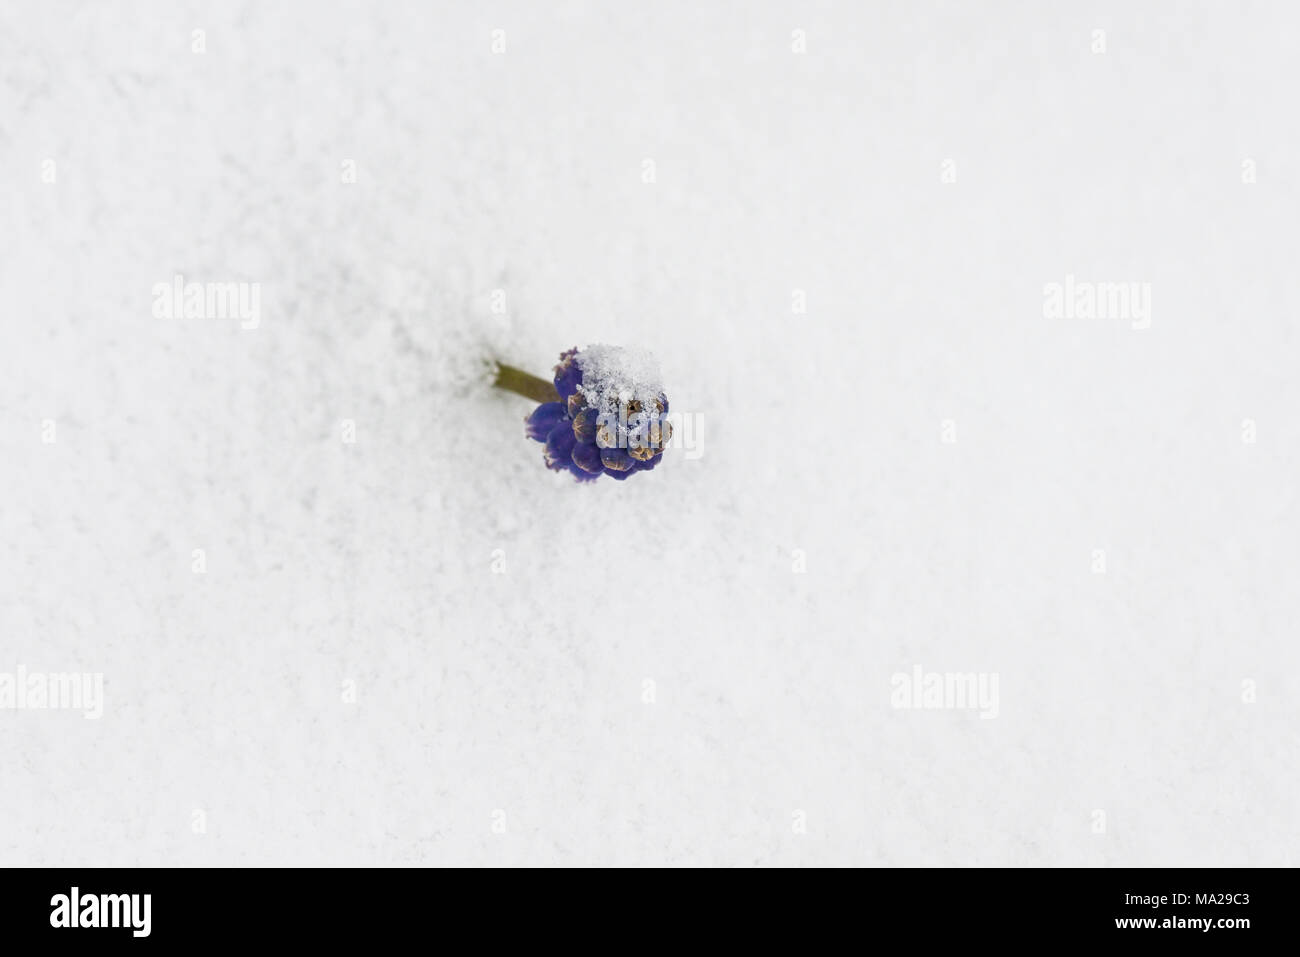 A grape hyacinth (Muscari) poking out from beneath snow Stock Photo